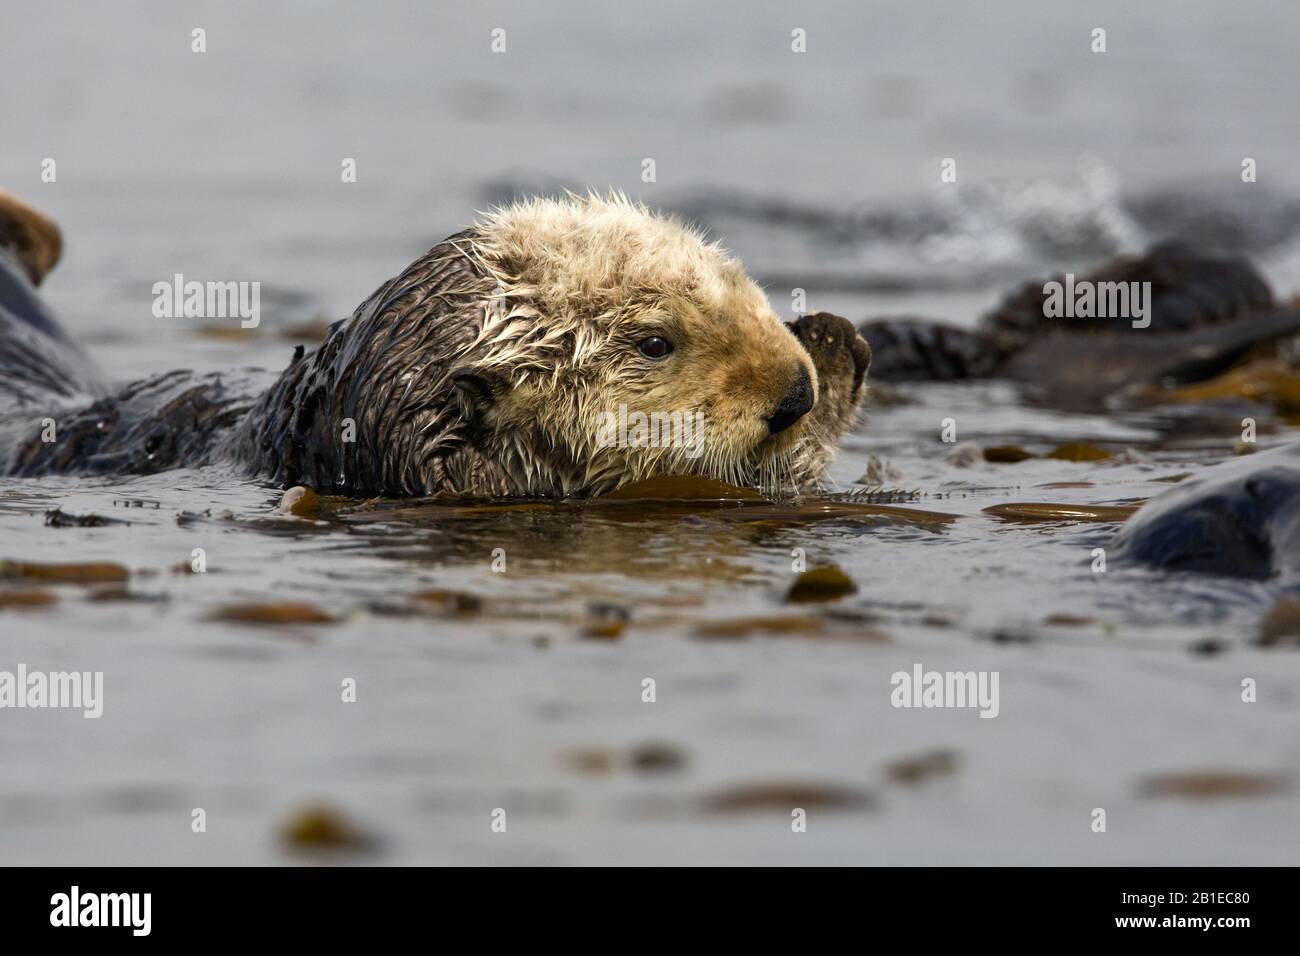 Sea Otter Enhydra Lutris Floating In The Water Side View Usa California Stock Photo Alamy